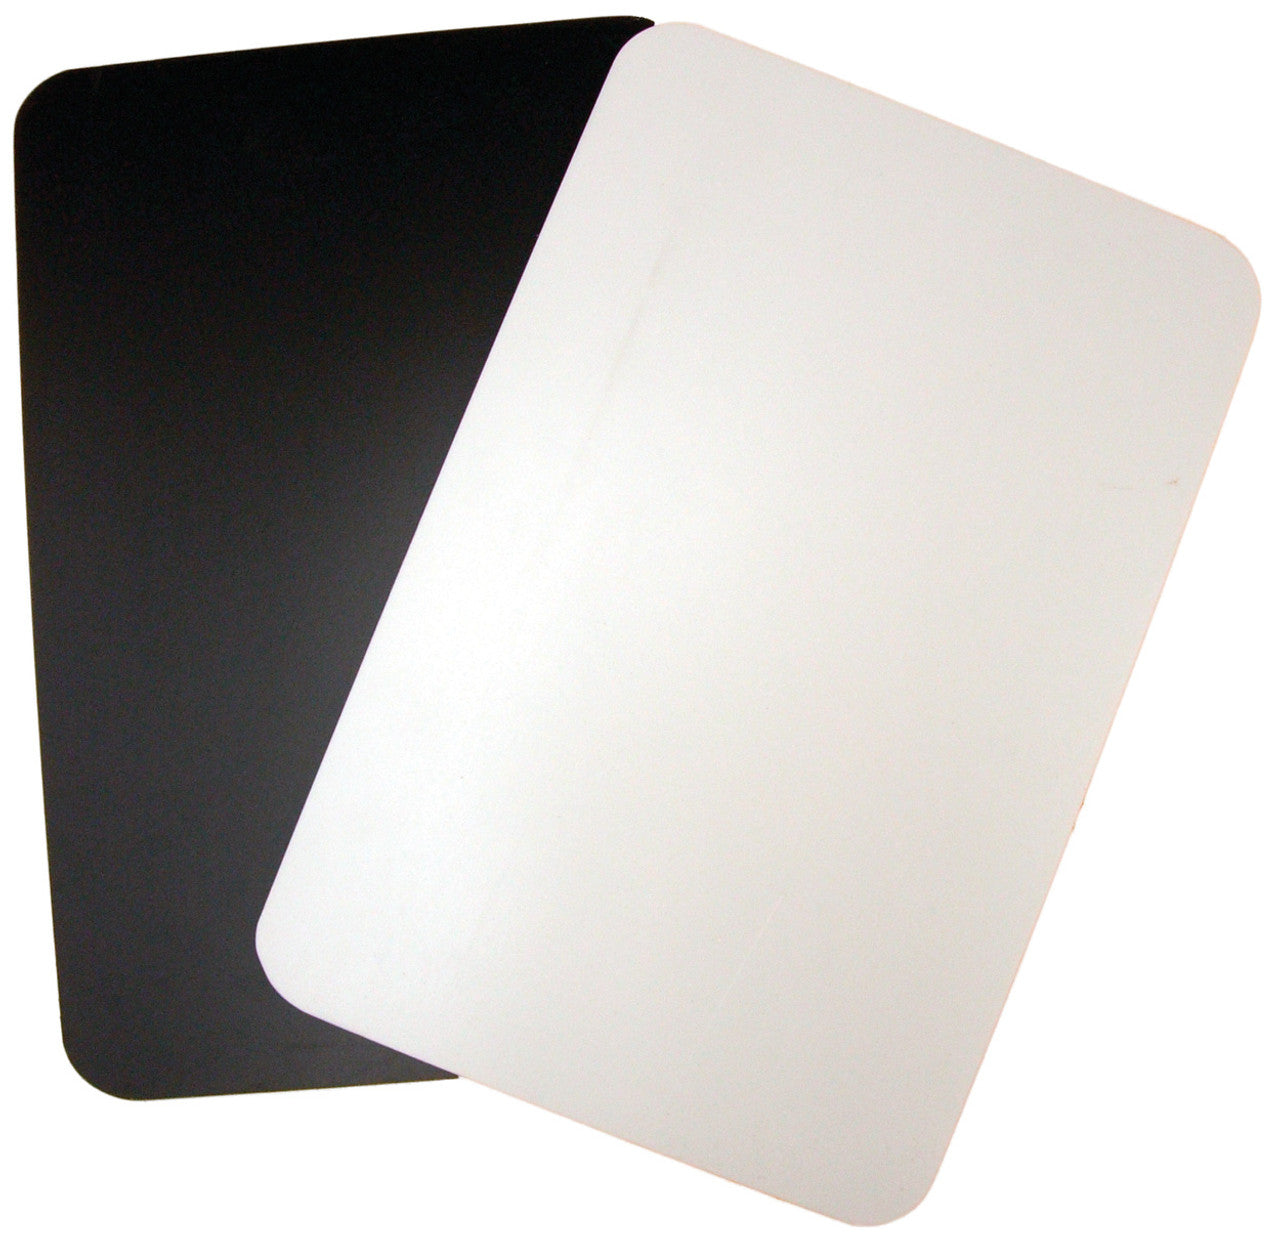 Both sides of a black and white low vision cutting board